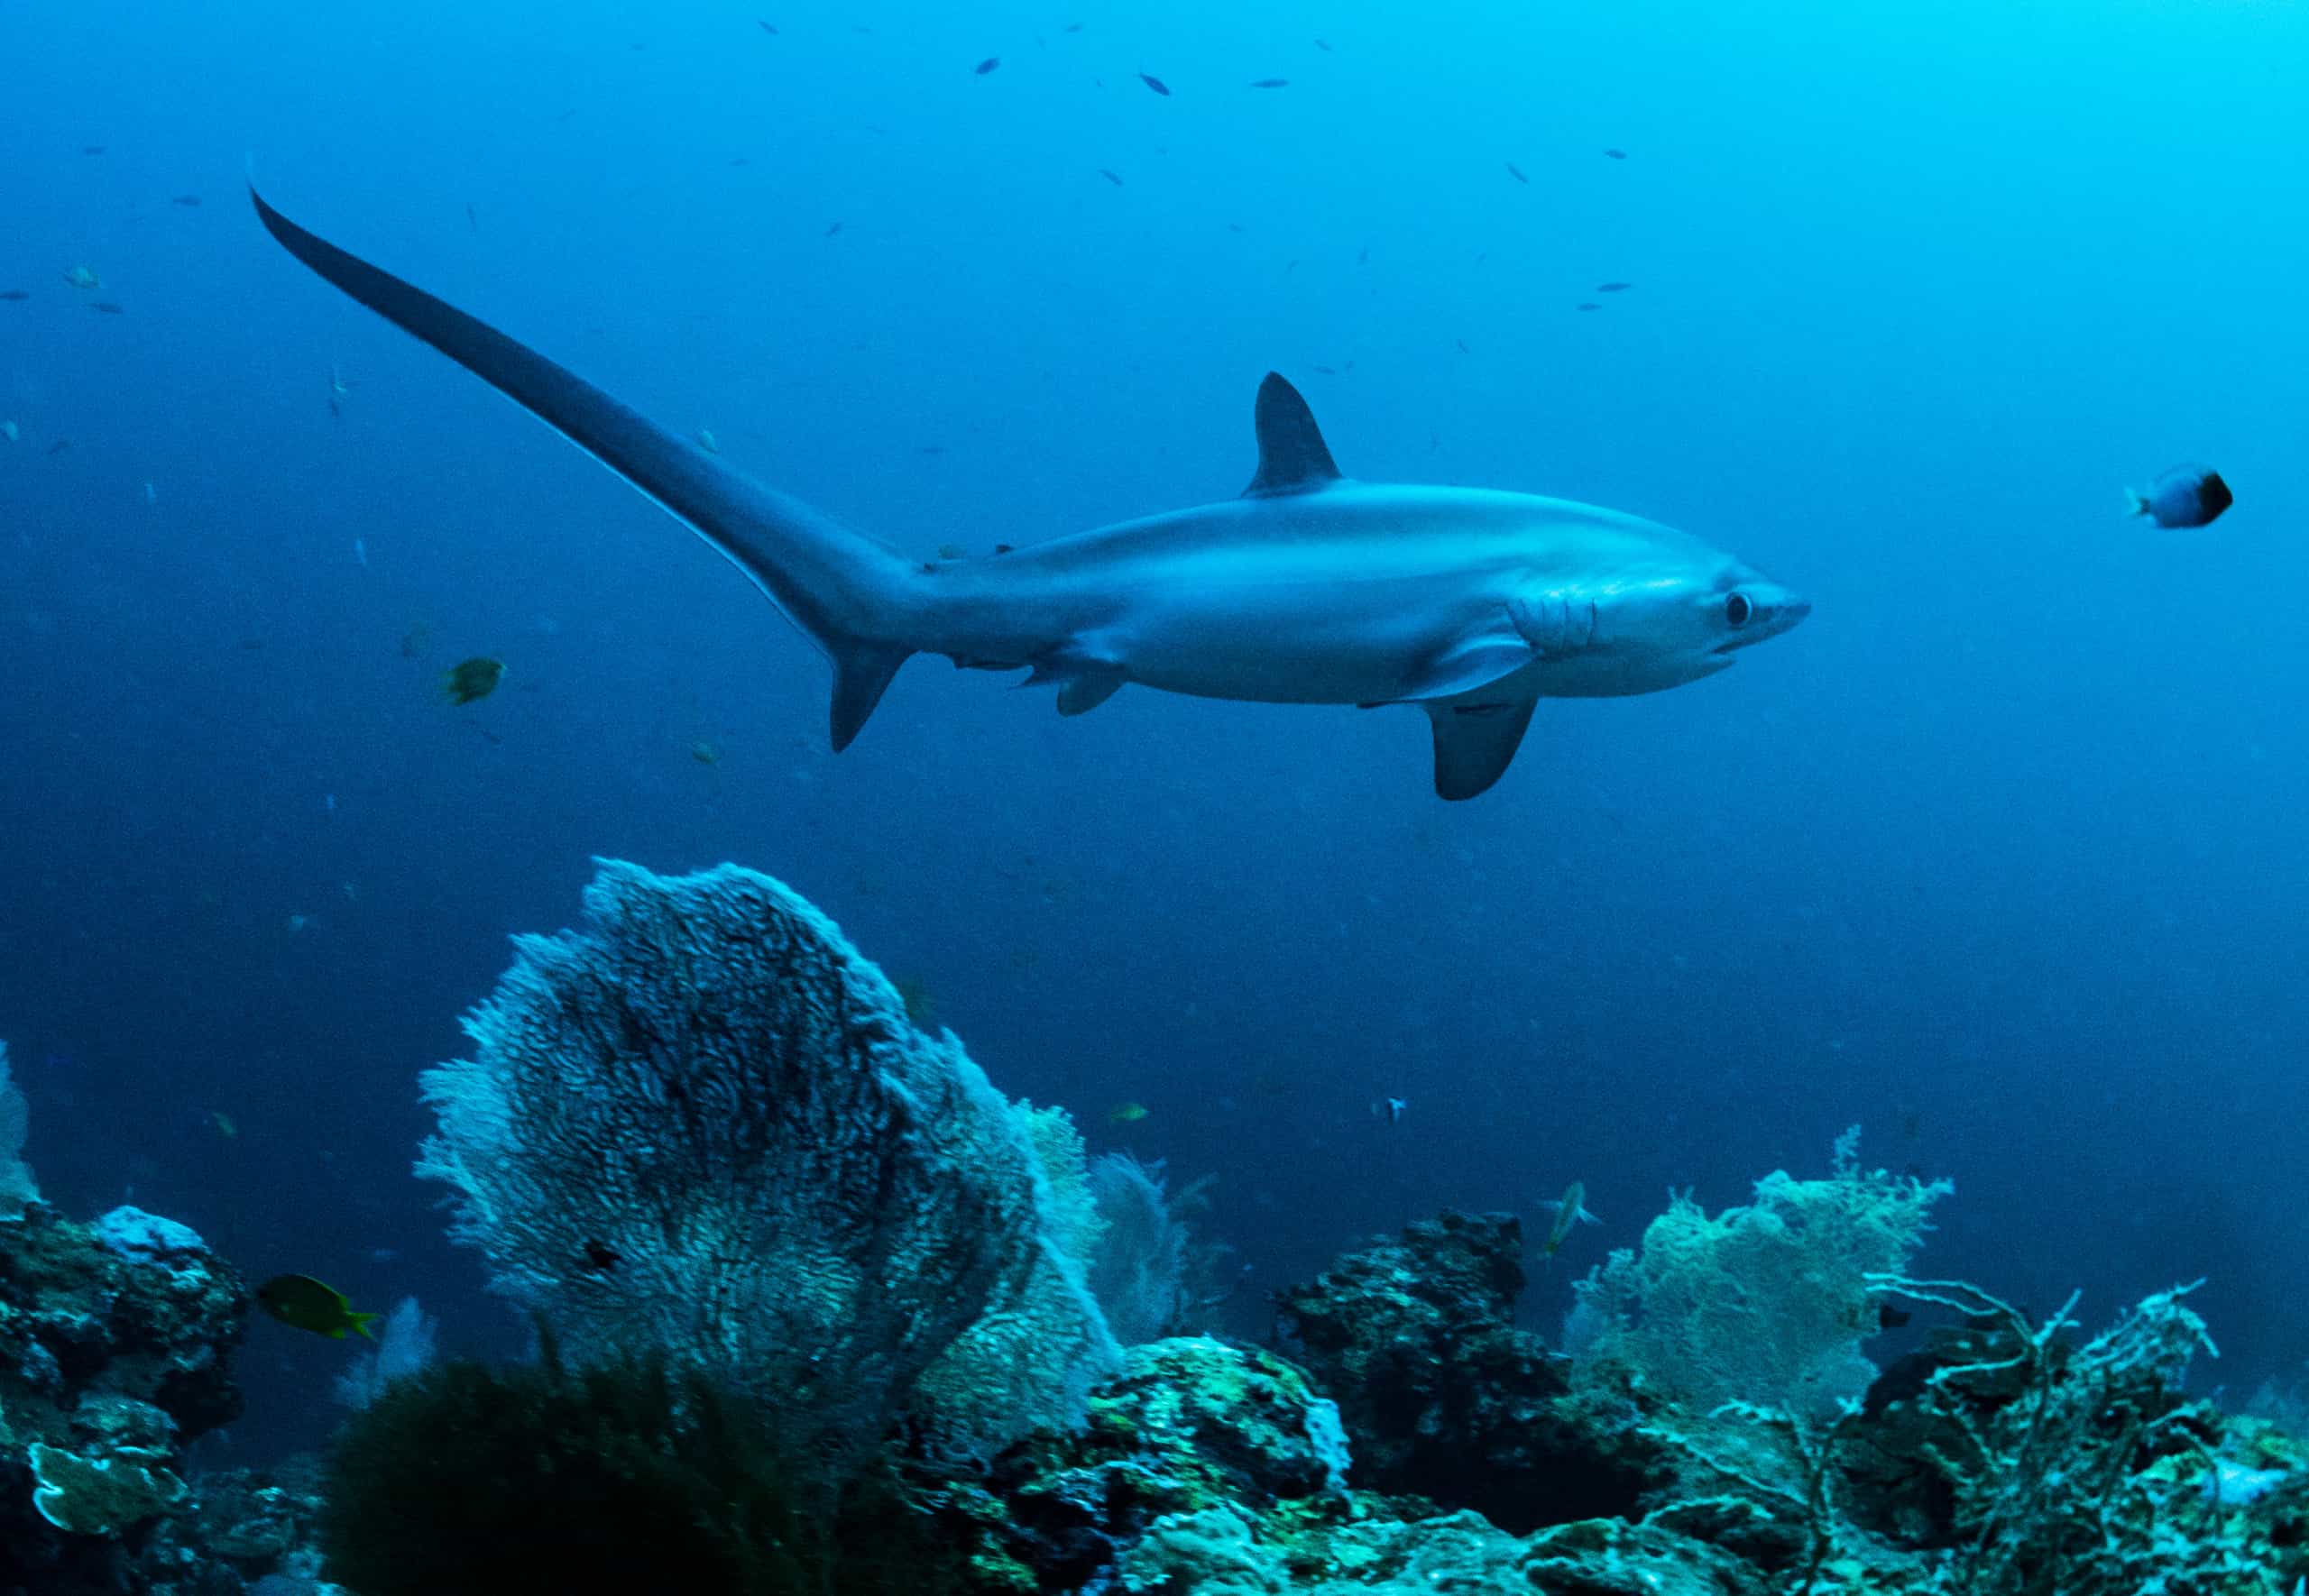 A pelagic thresher shark, Alopias pelagicus, swims by a coral reef in the Phillipines.